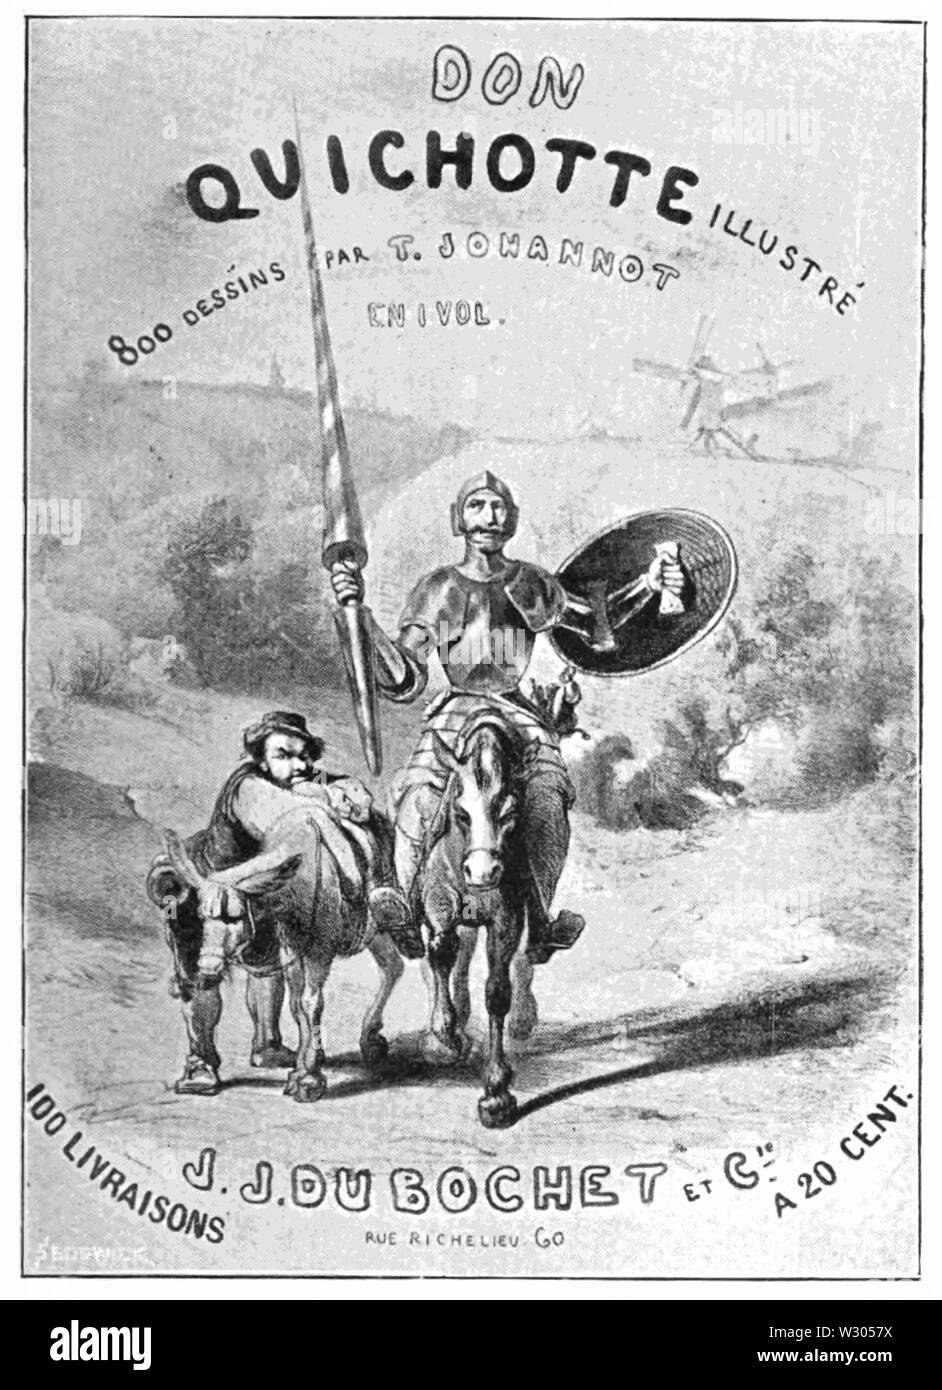 PP D037 don quichotte illustrated by tony johannot Stock Photo